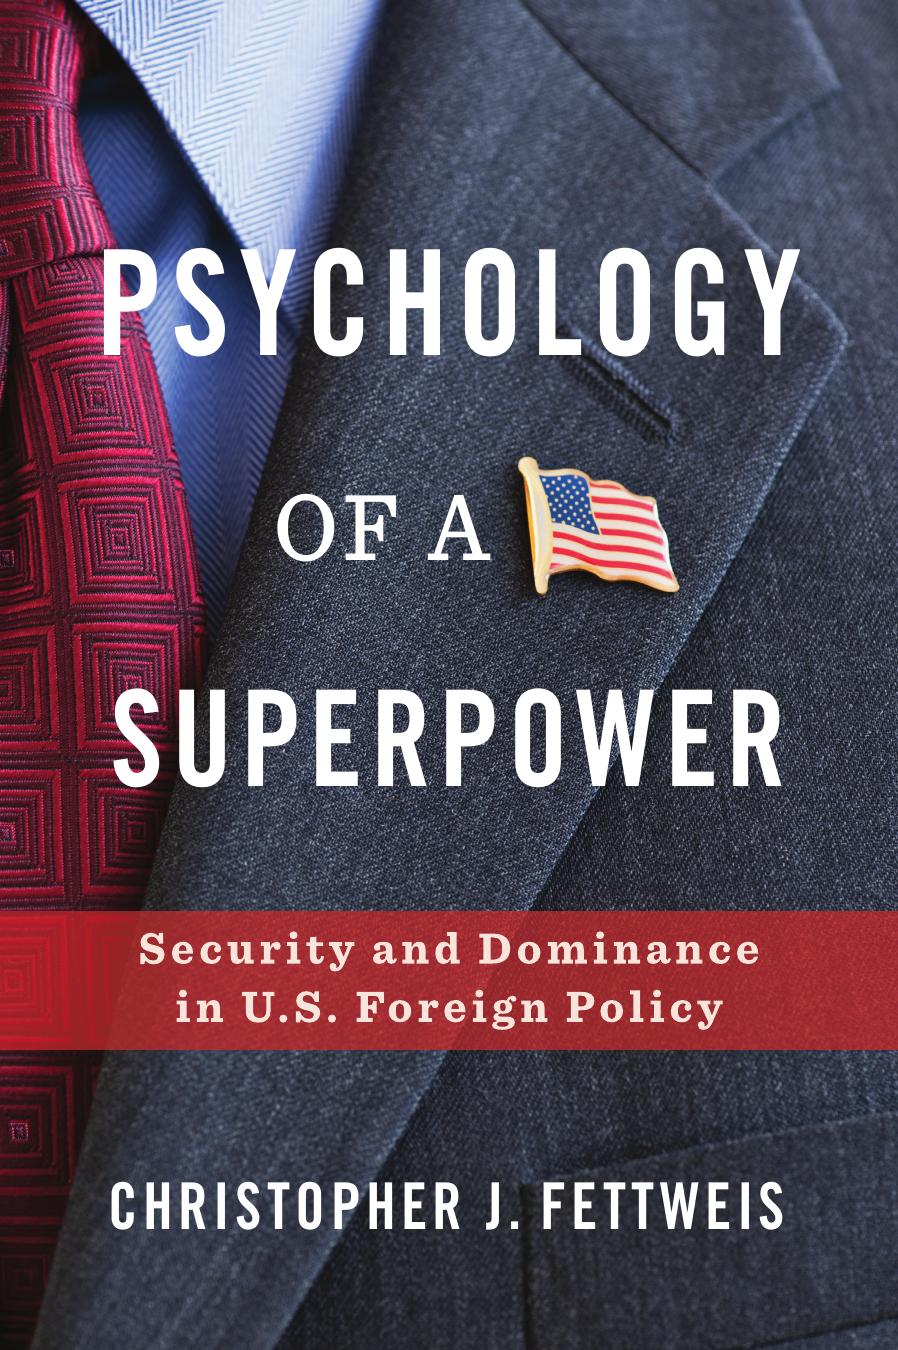 Psychology of a Superpower: Security and Dominance in U.S. Foreign Policy